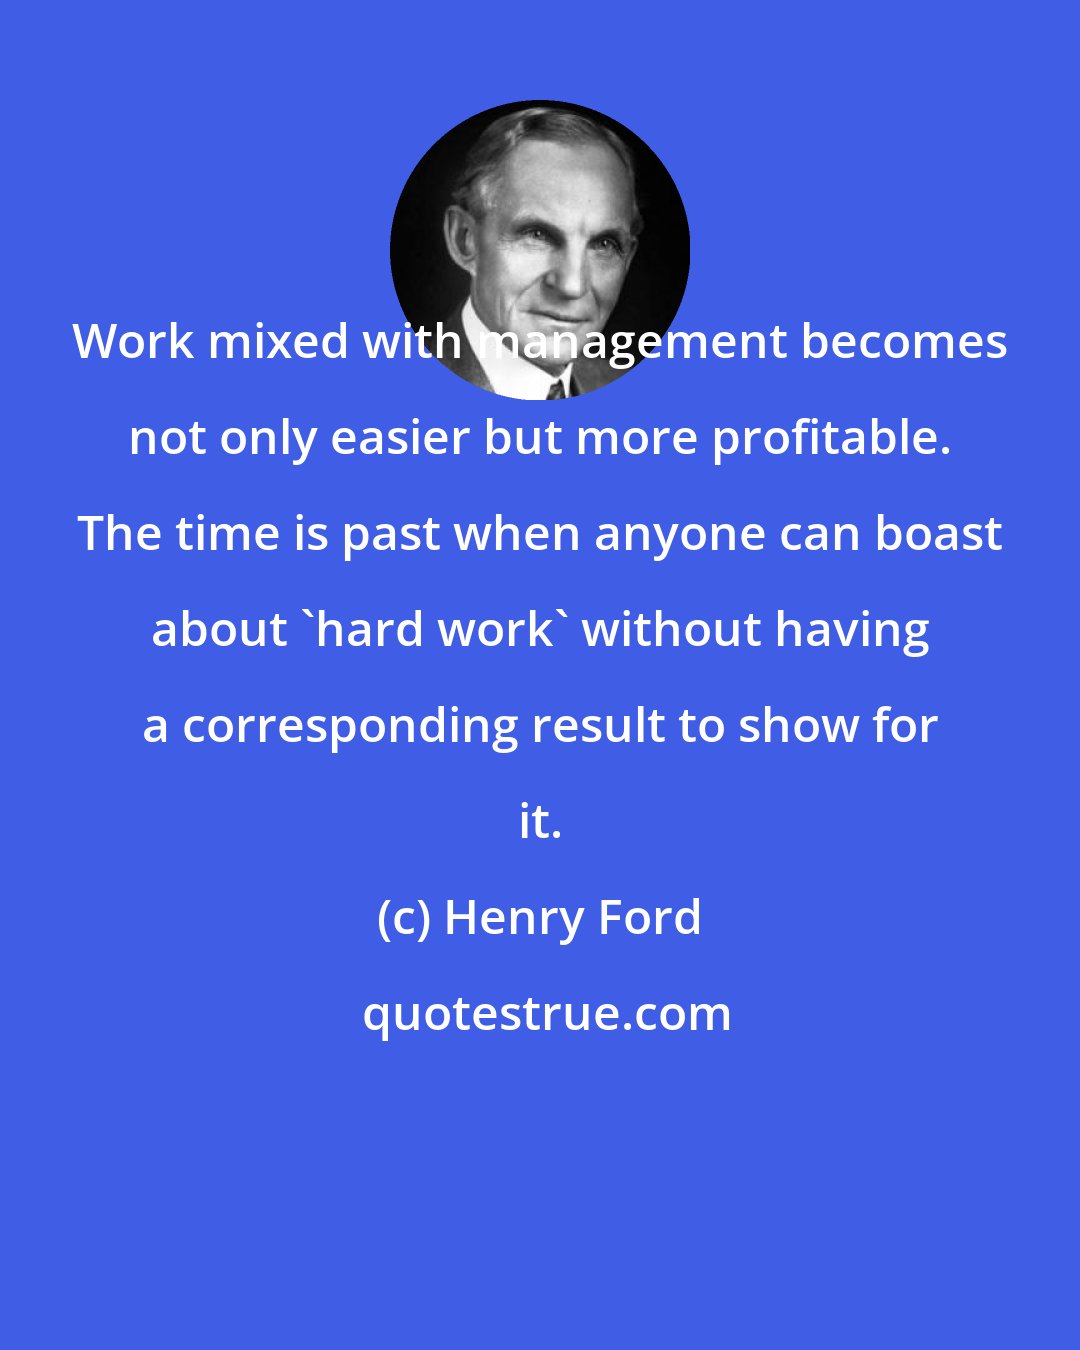 Henry Ford: Work mixed with management becomes not only easier but more profitable. The time is past when anyone can boast about 'hard work' without having a corresponding result to show for it.